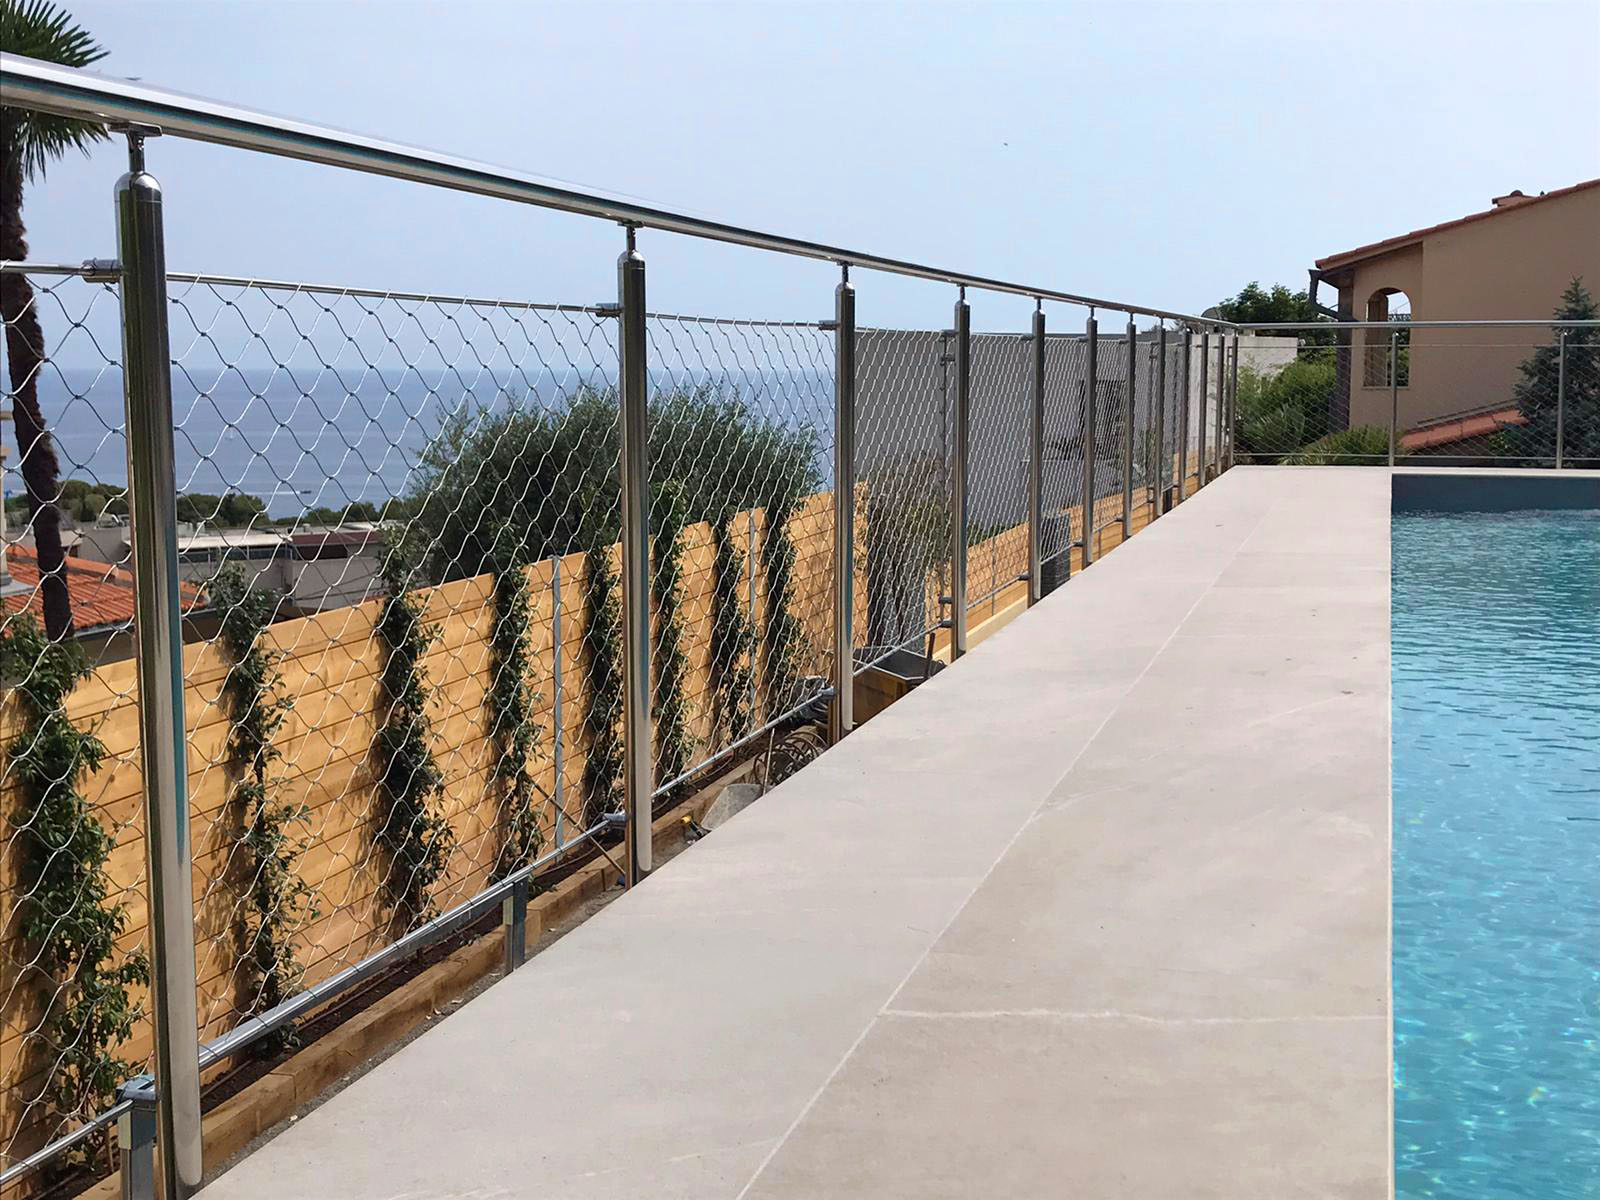 IMPERIA - Railings with steel rod with stainless steel net and tubular handrail diameter 42